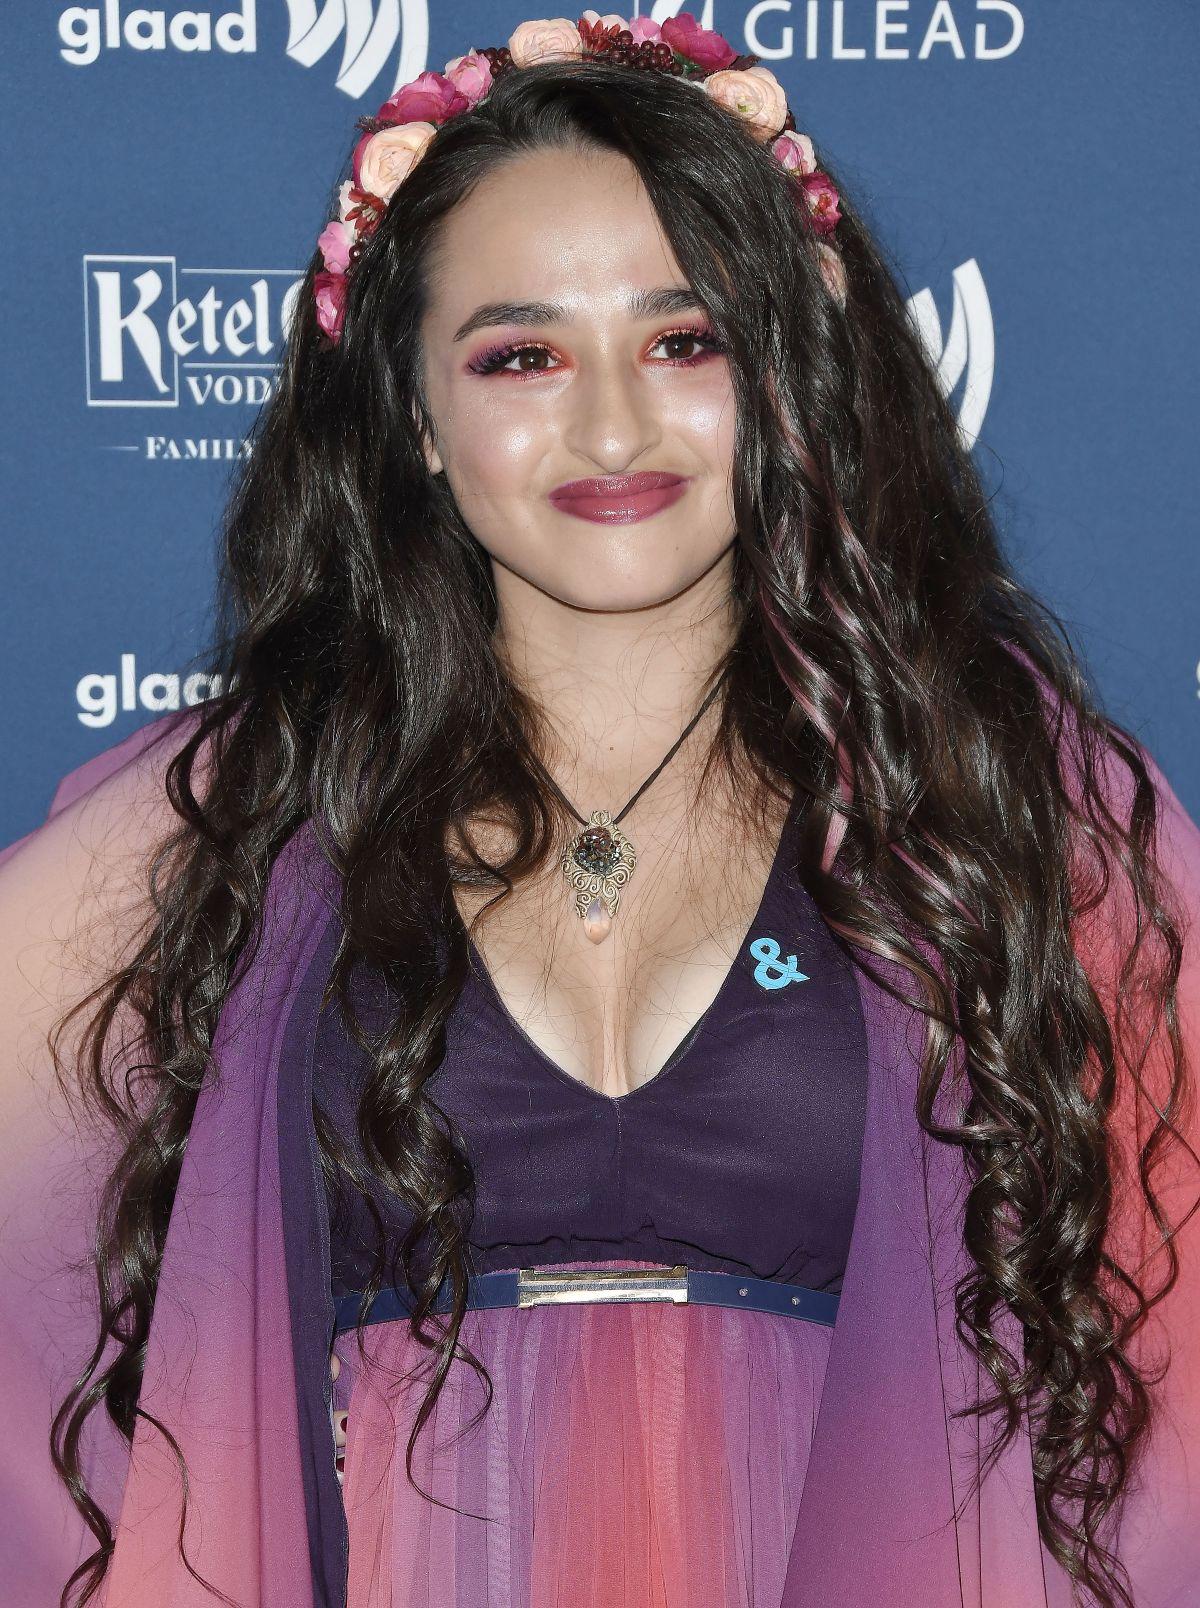 70+ Hot Pictures Of Jazz Jennings Which Will Make Your Mouth Water 20